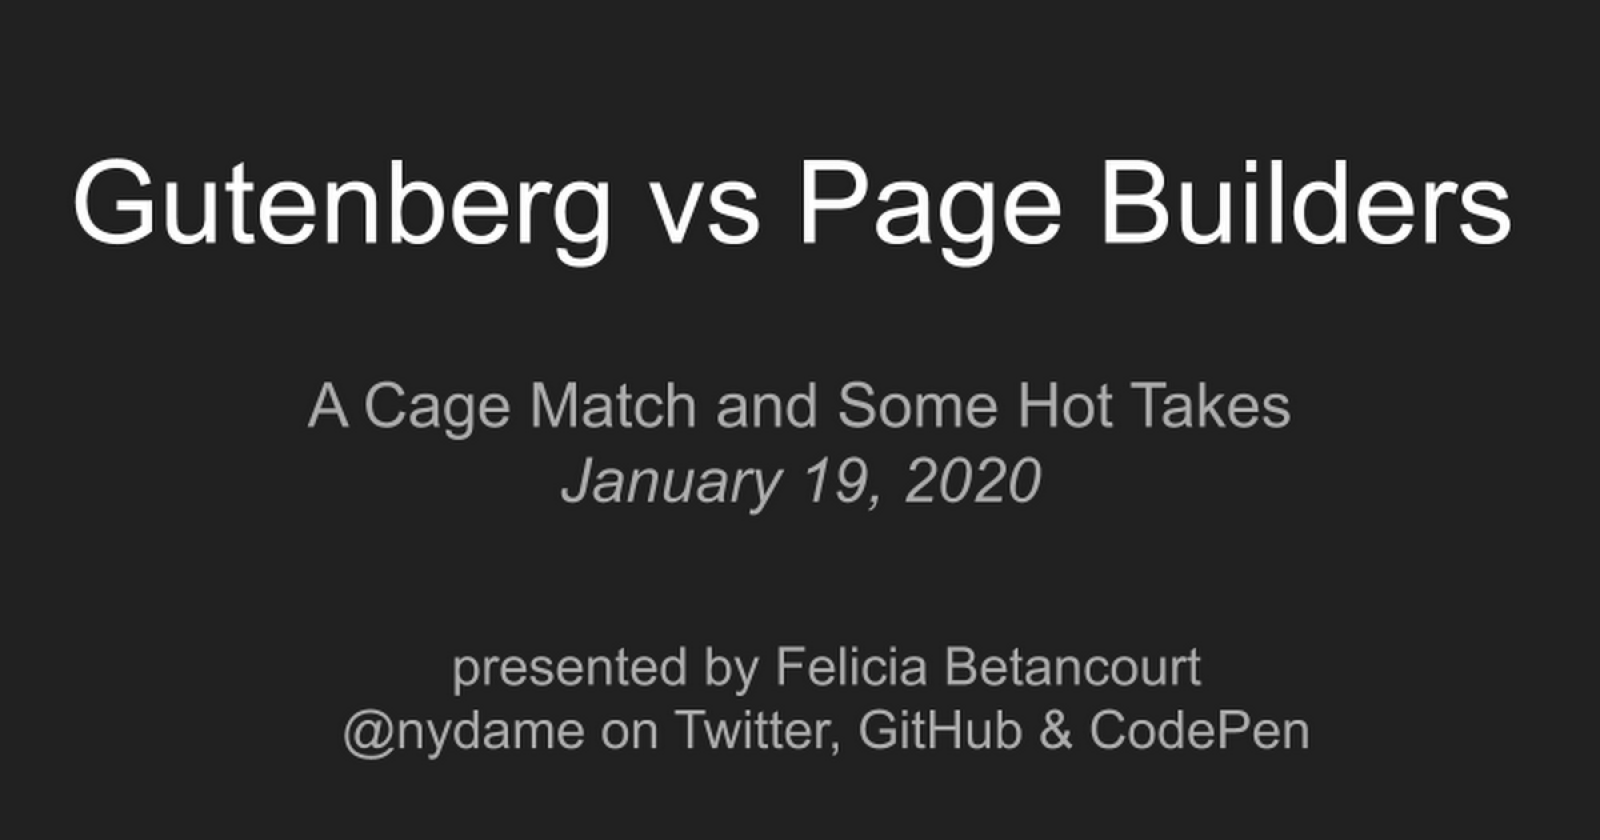 Gutenberg vs. Page Builders: A Cage Match and Some Hot Takes